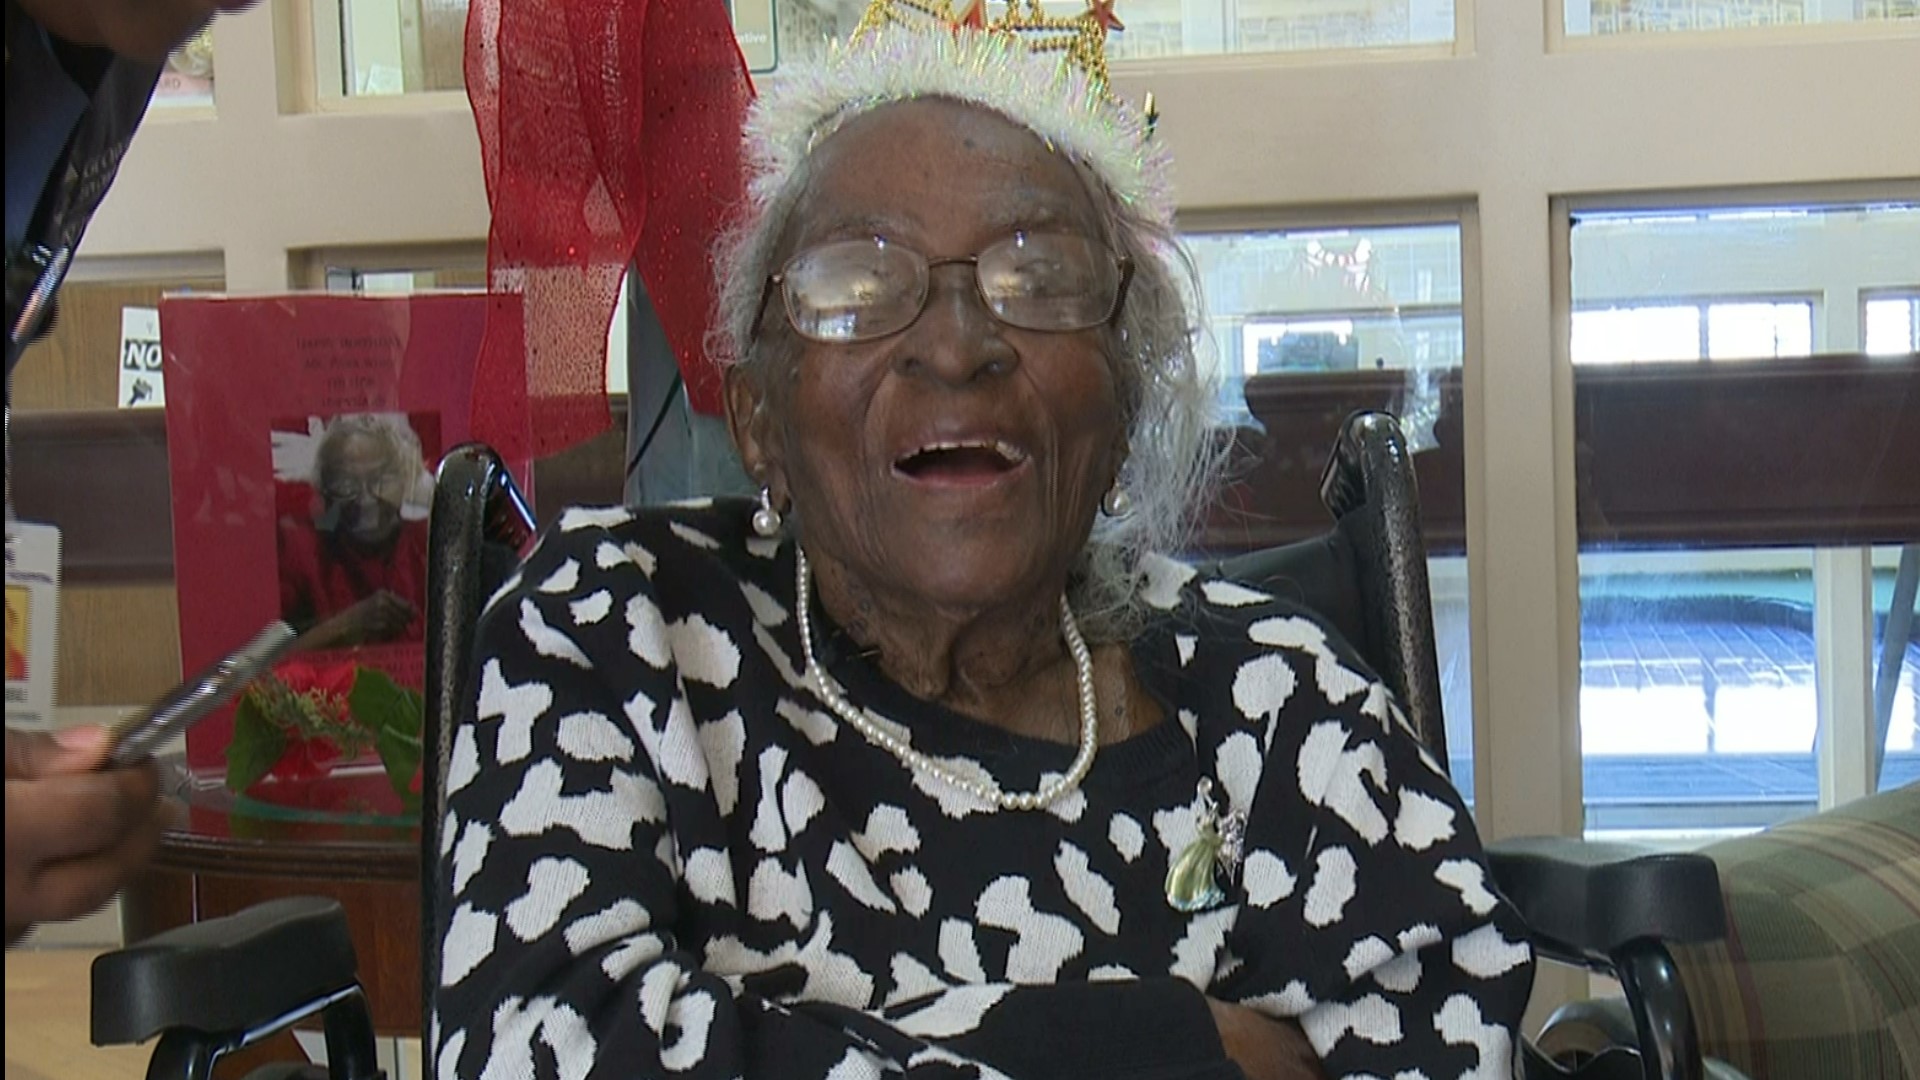 Today, Flora Mae White is celebrating her 108th birthday and her family believes she's the oldest living woman in central Georgia.